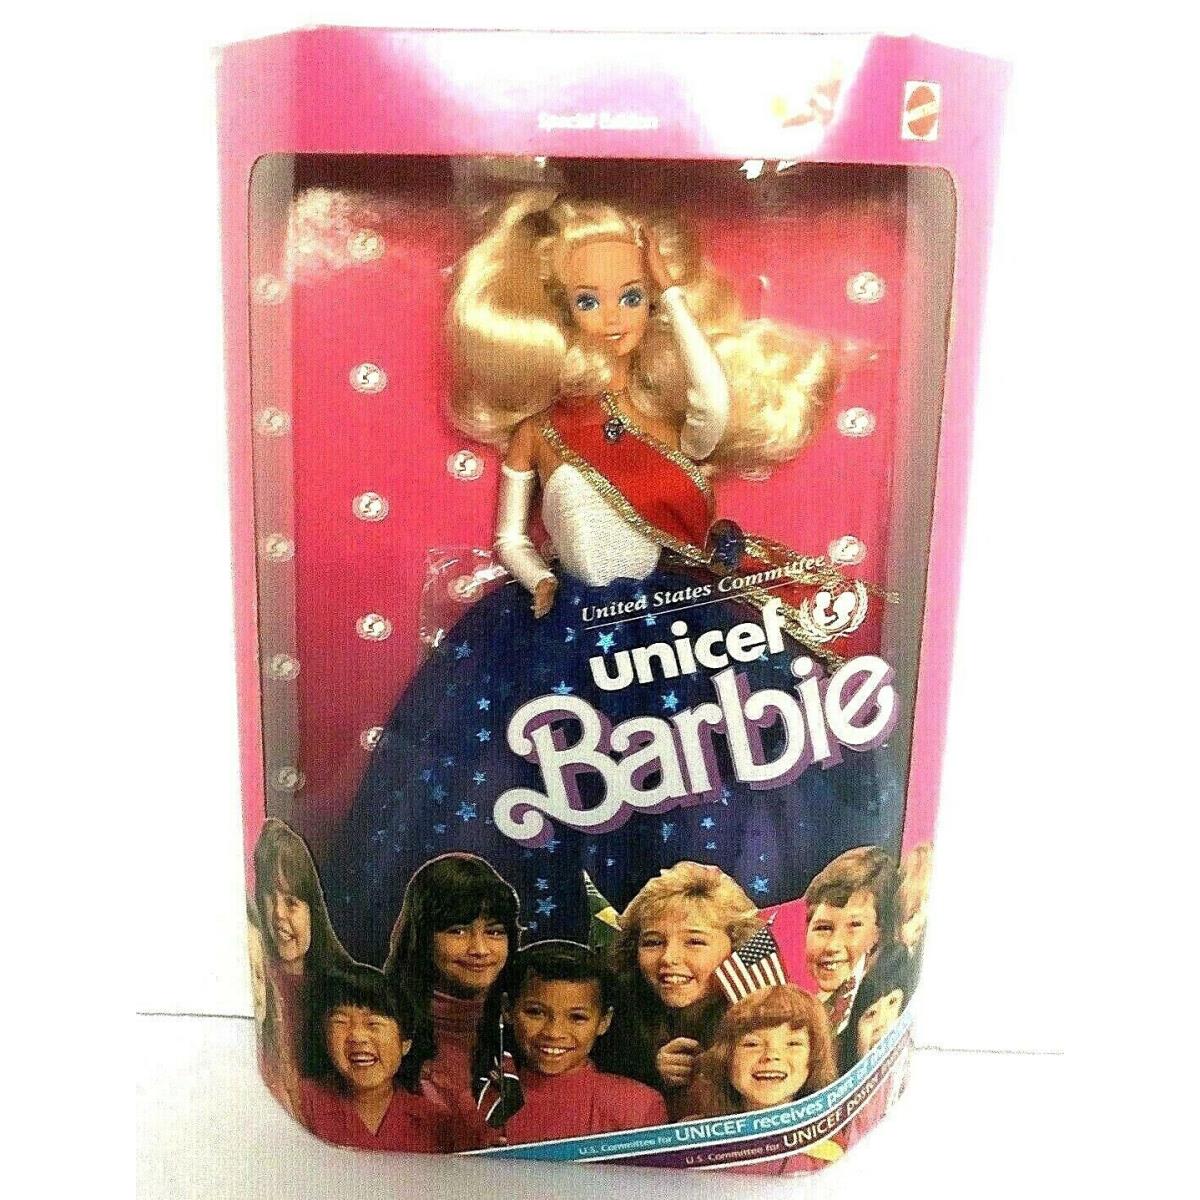 1989 Vintage Barbie United States Committee Unicef Mattel Special Edition Nrfb